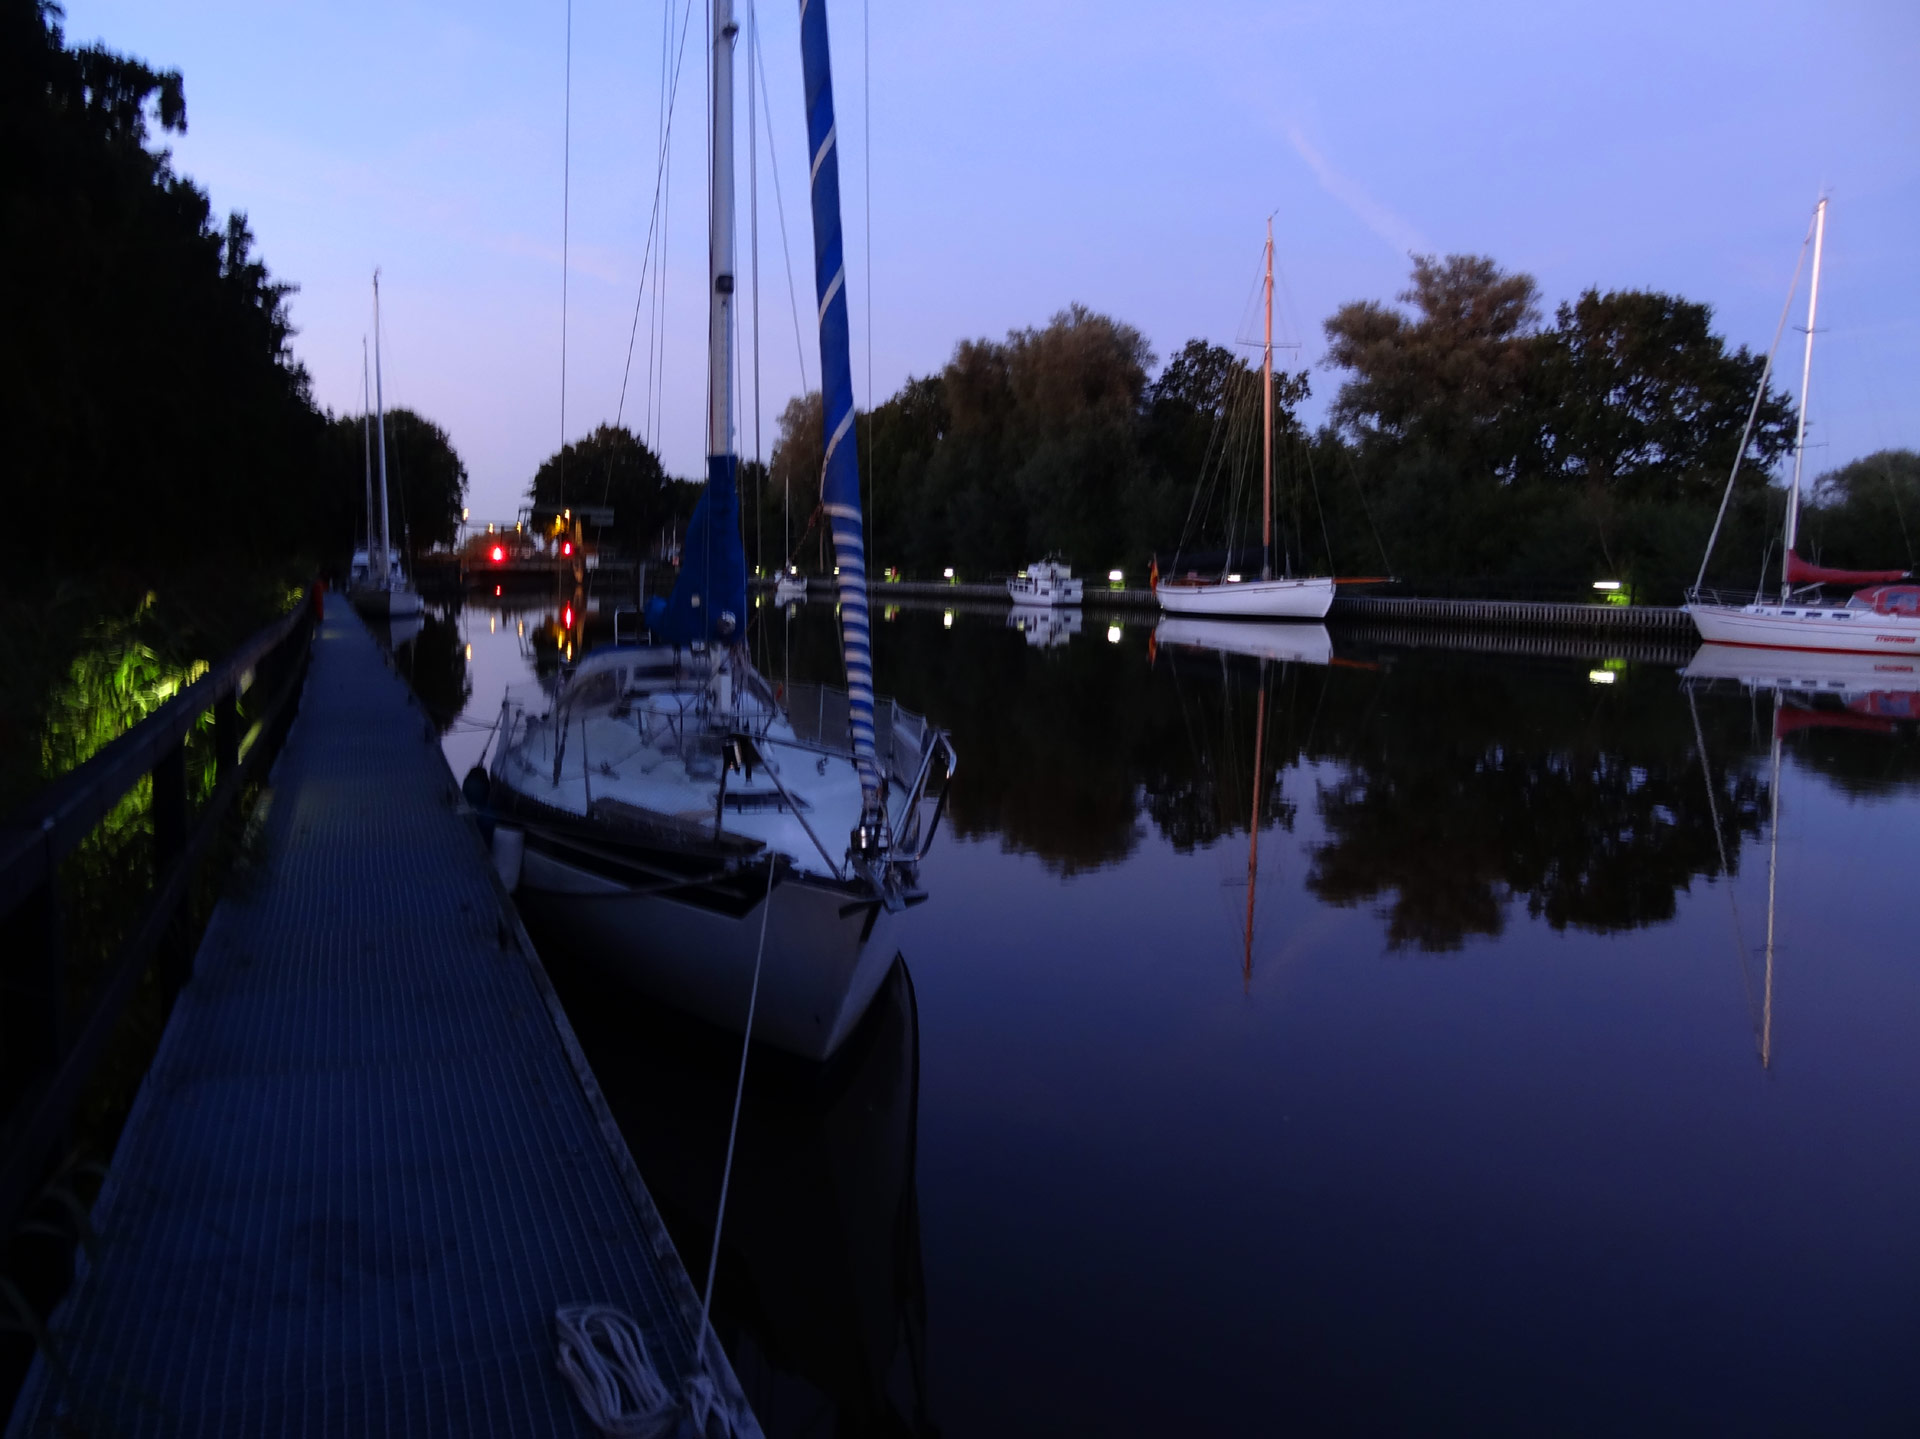 SY OLIVIA mooring with some other yachts in Gieselaukanal. 